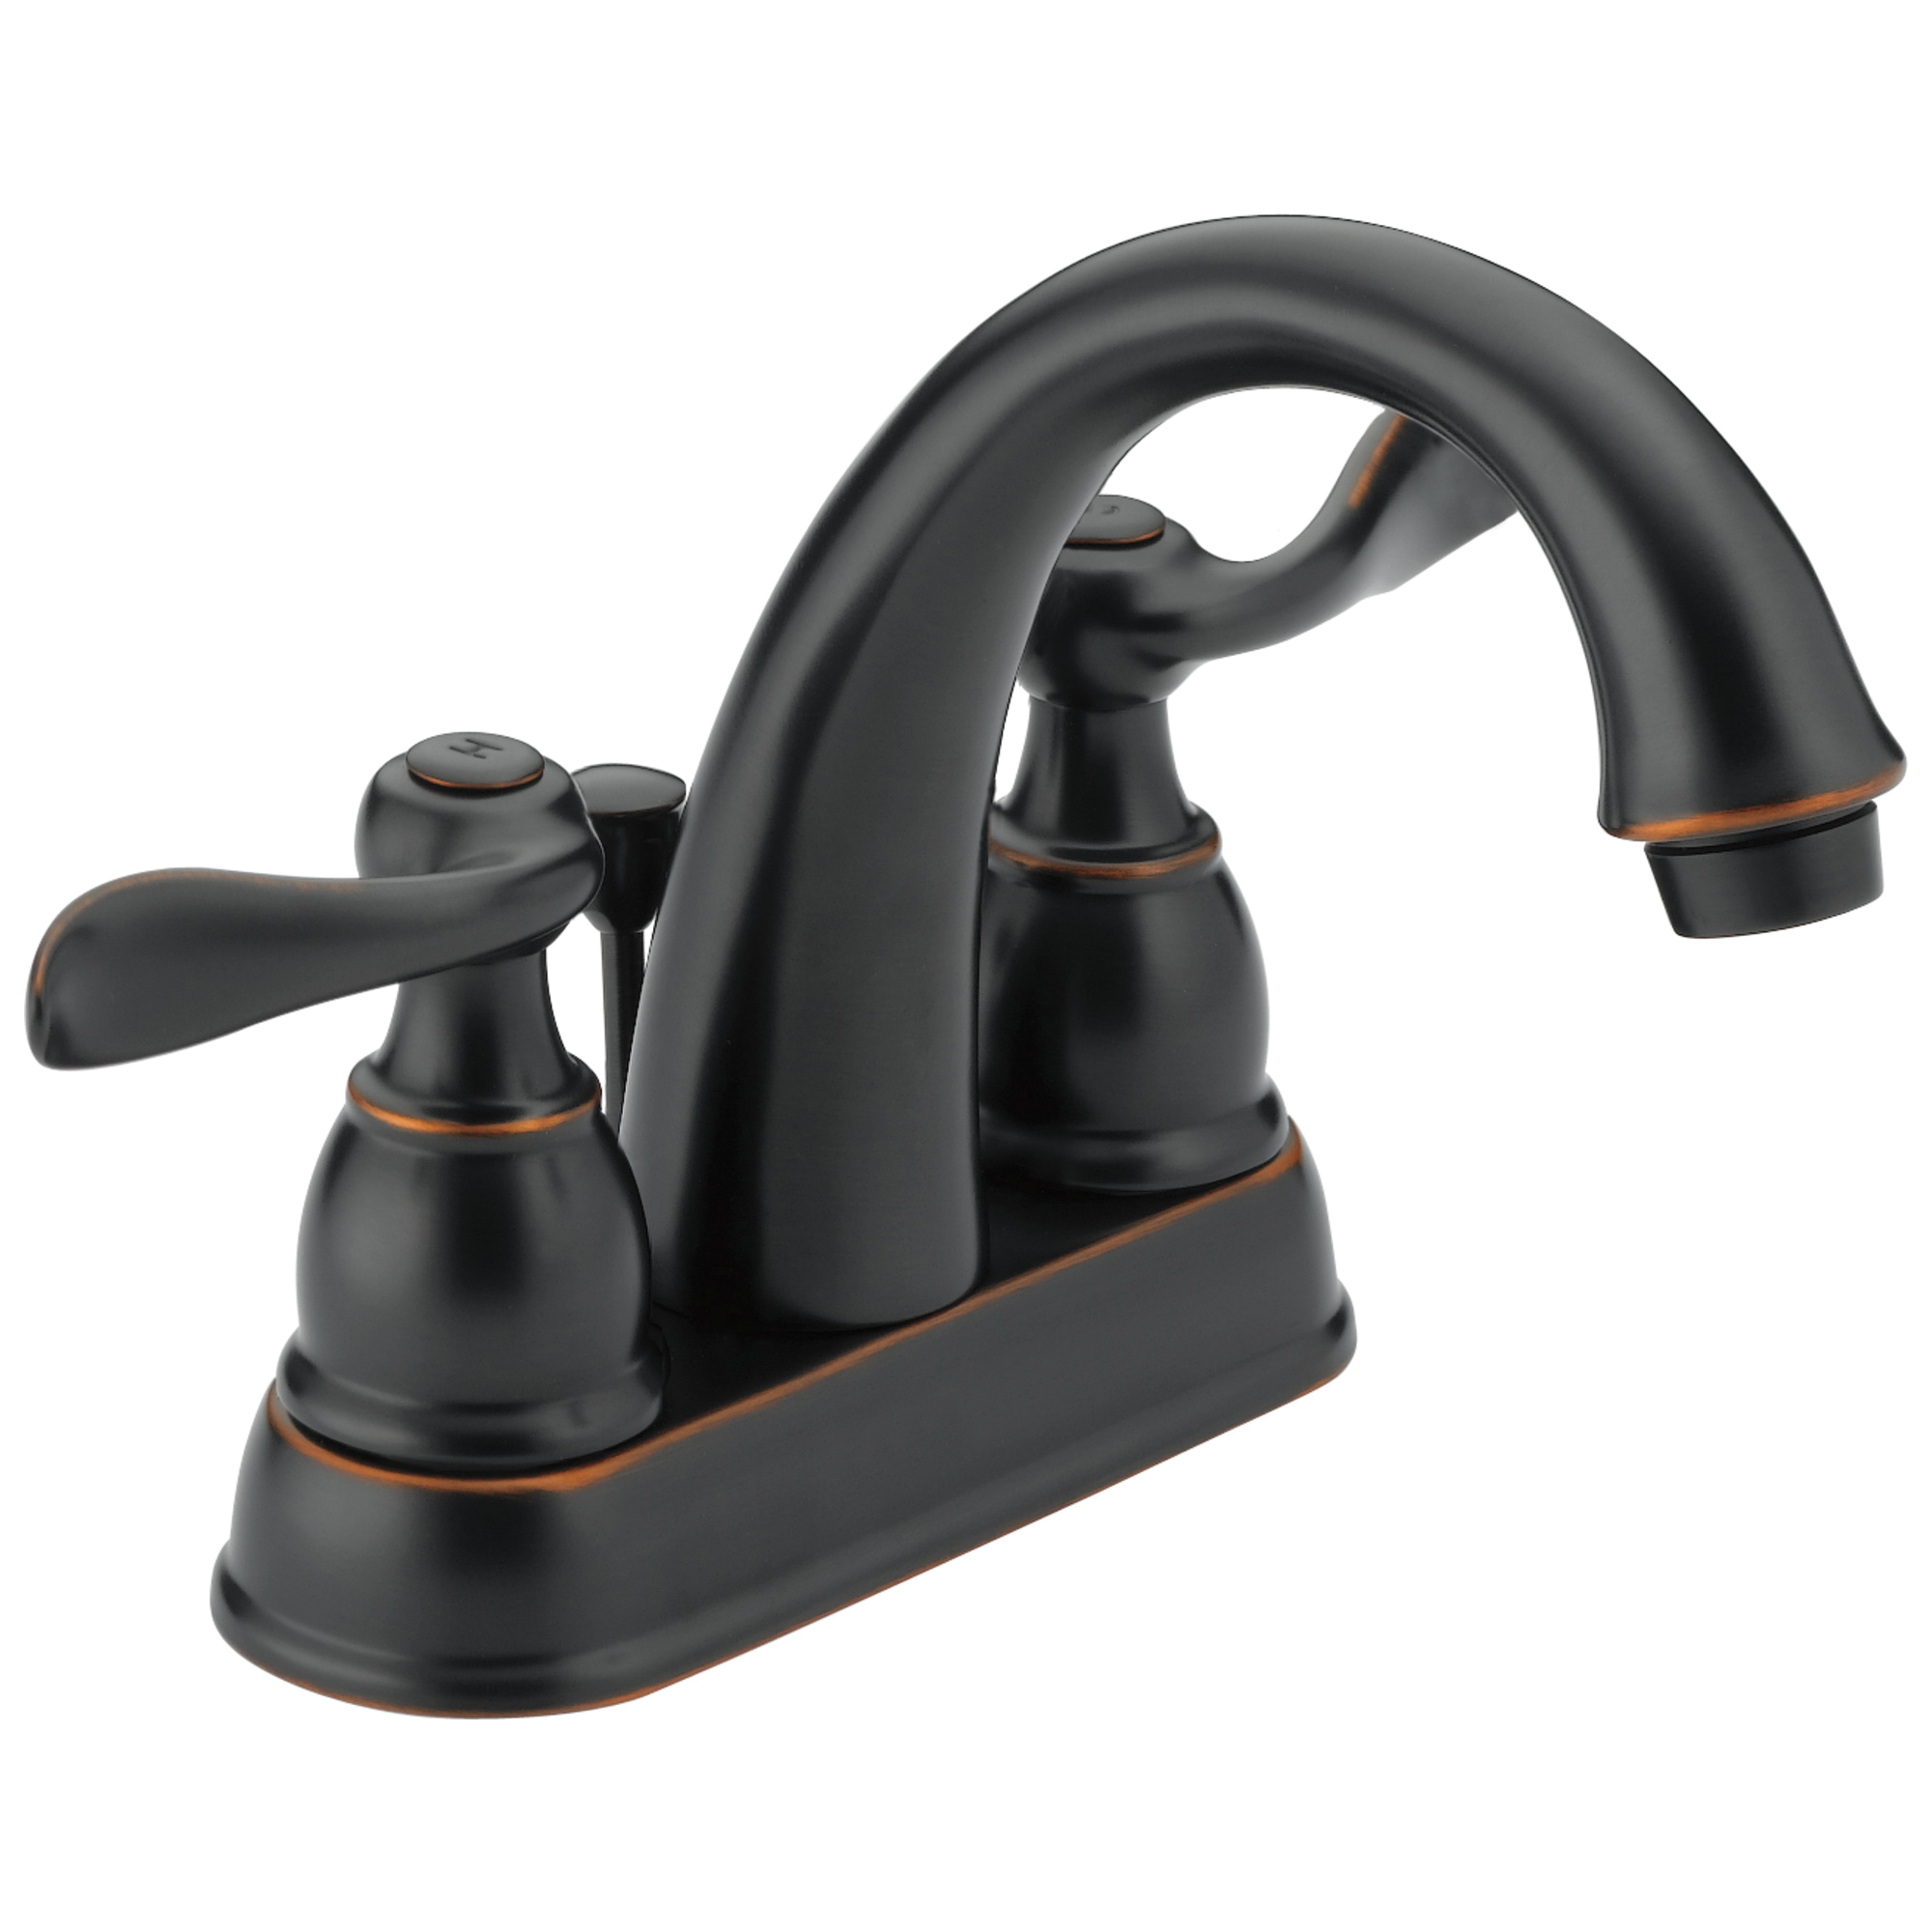 B2596LF-OB Centerset Lavatory Faucet, Windemere®, Oil Rubbed Bronze, 2 Handles, Metal Pop-Up Drain, 1.2 gpm - Discontinued